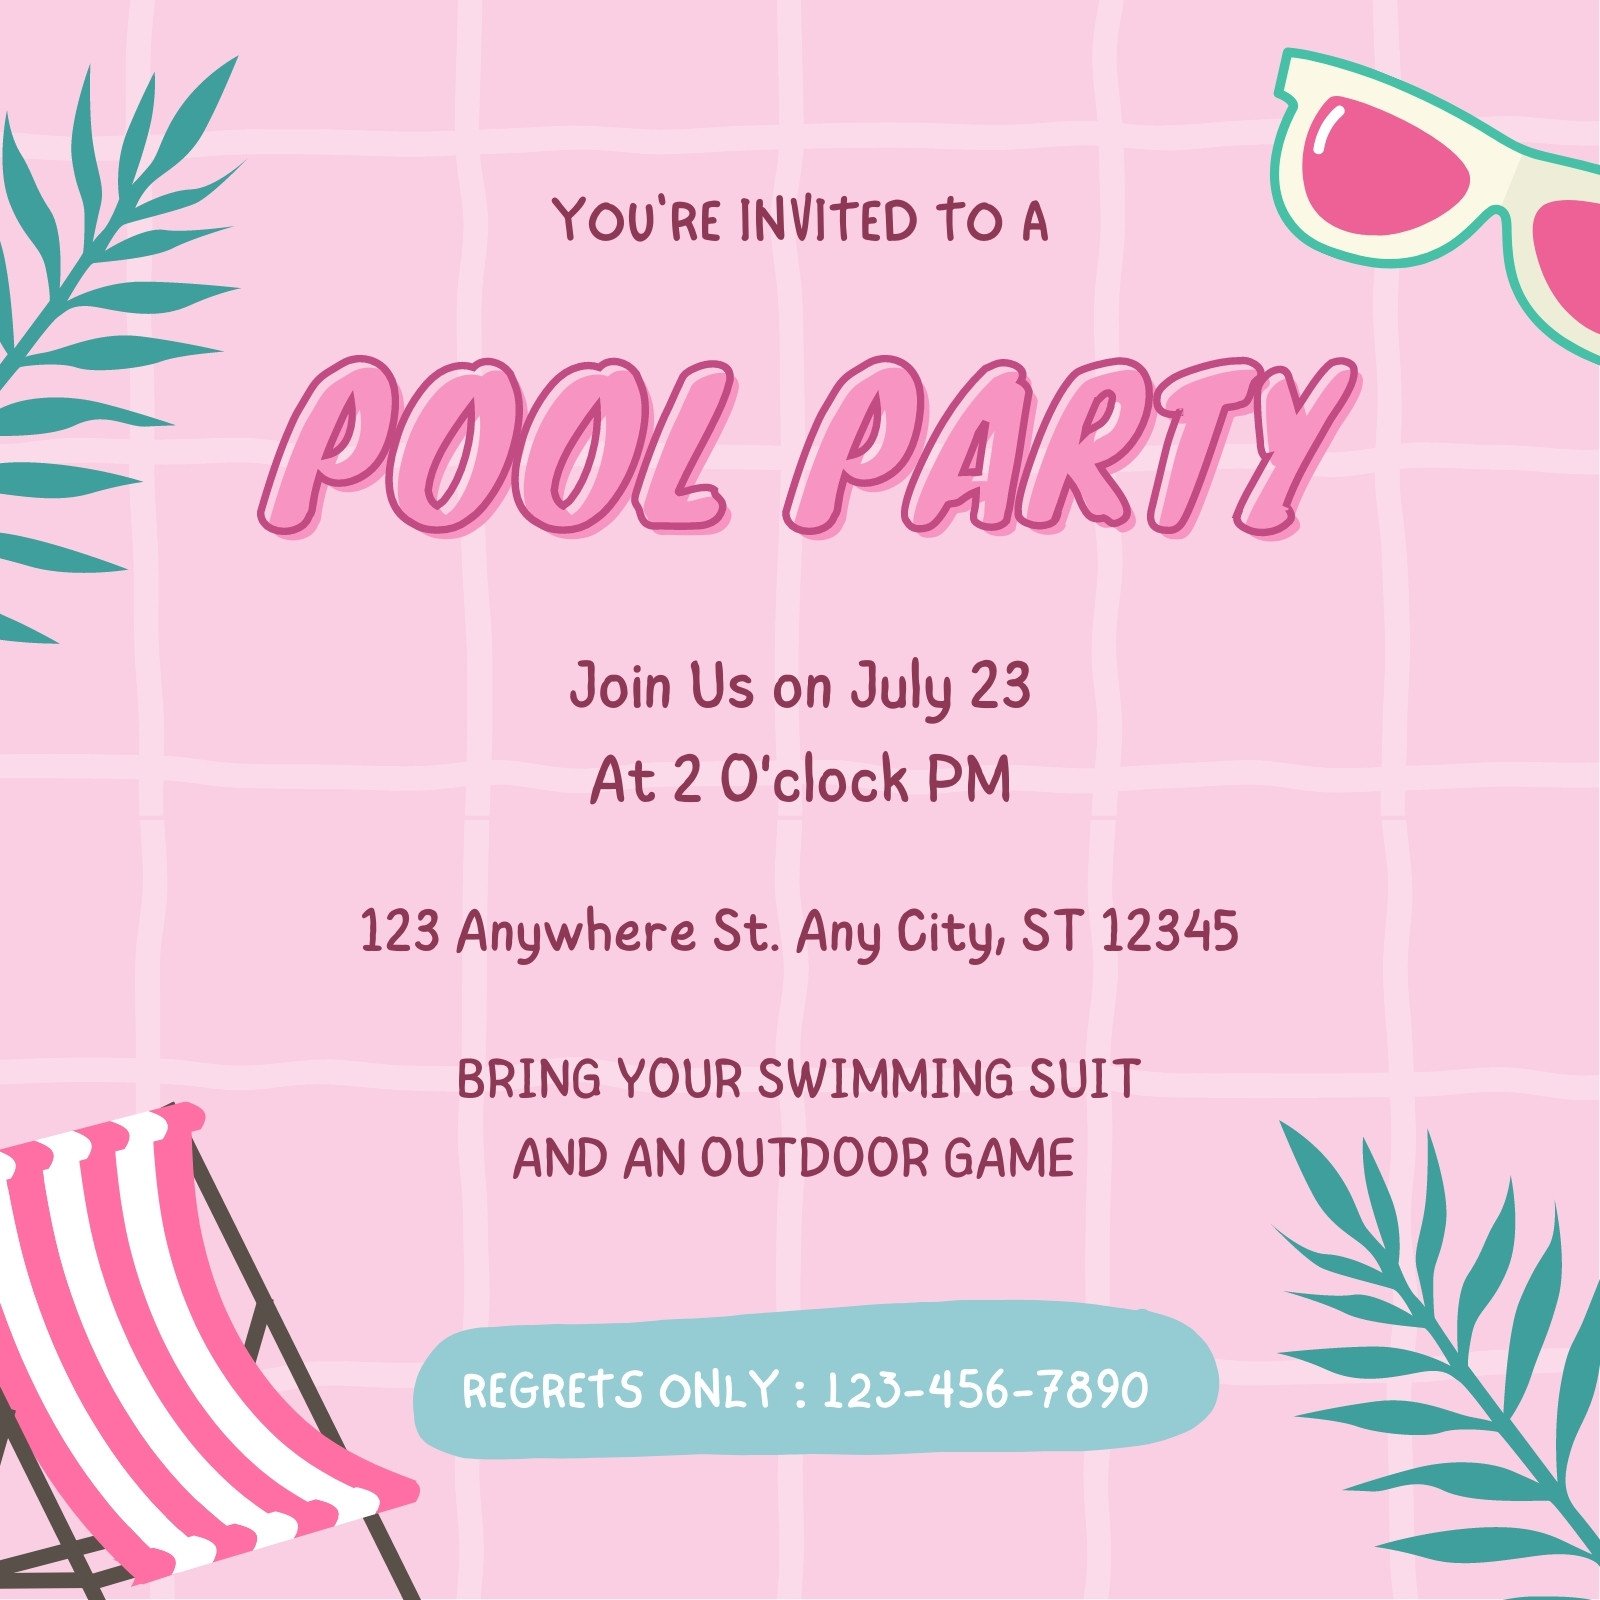 Pool Party Invitation Card Template On Swimming Pool Background - Vector  Illustration PNG Images